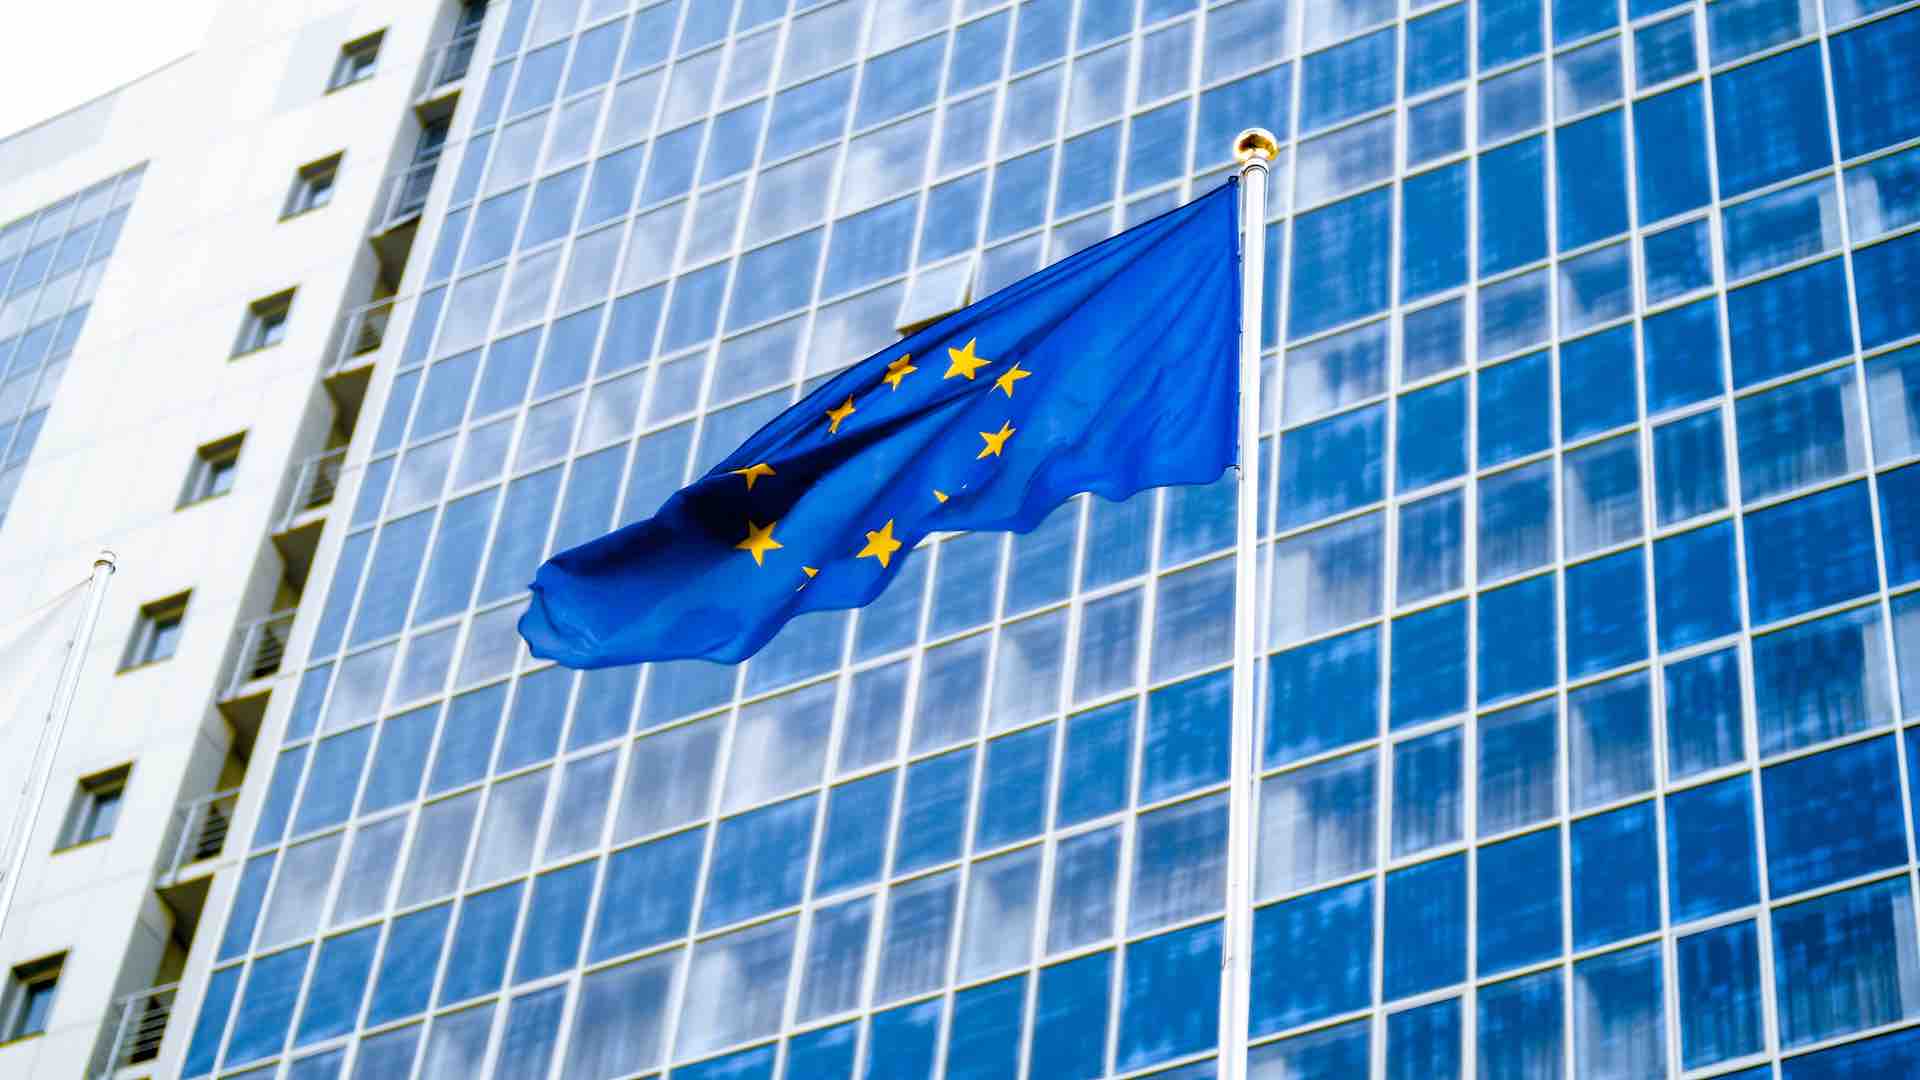 European Union enacts ambitious fiscal reform package